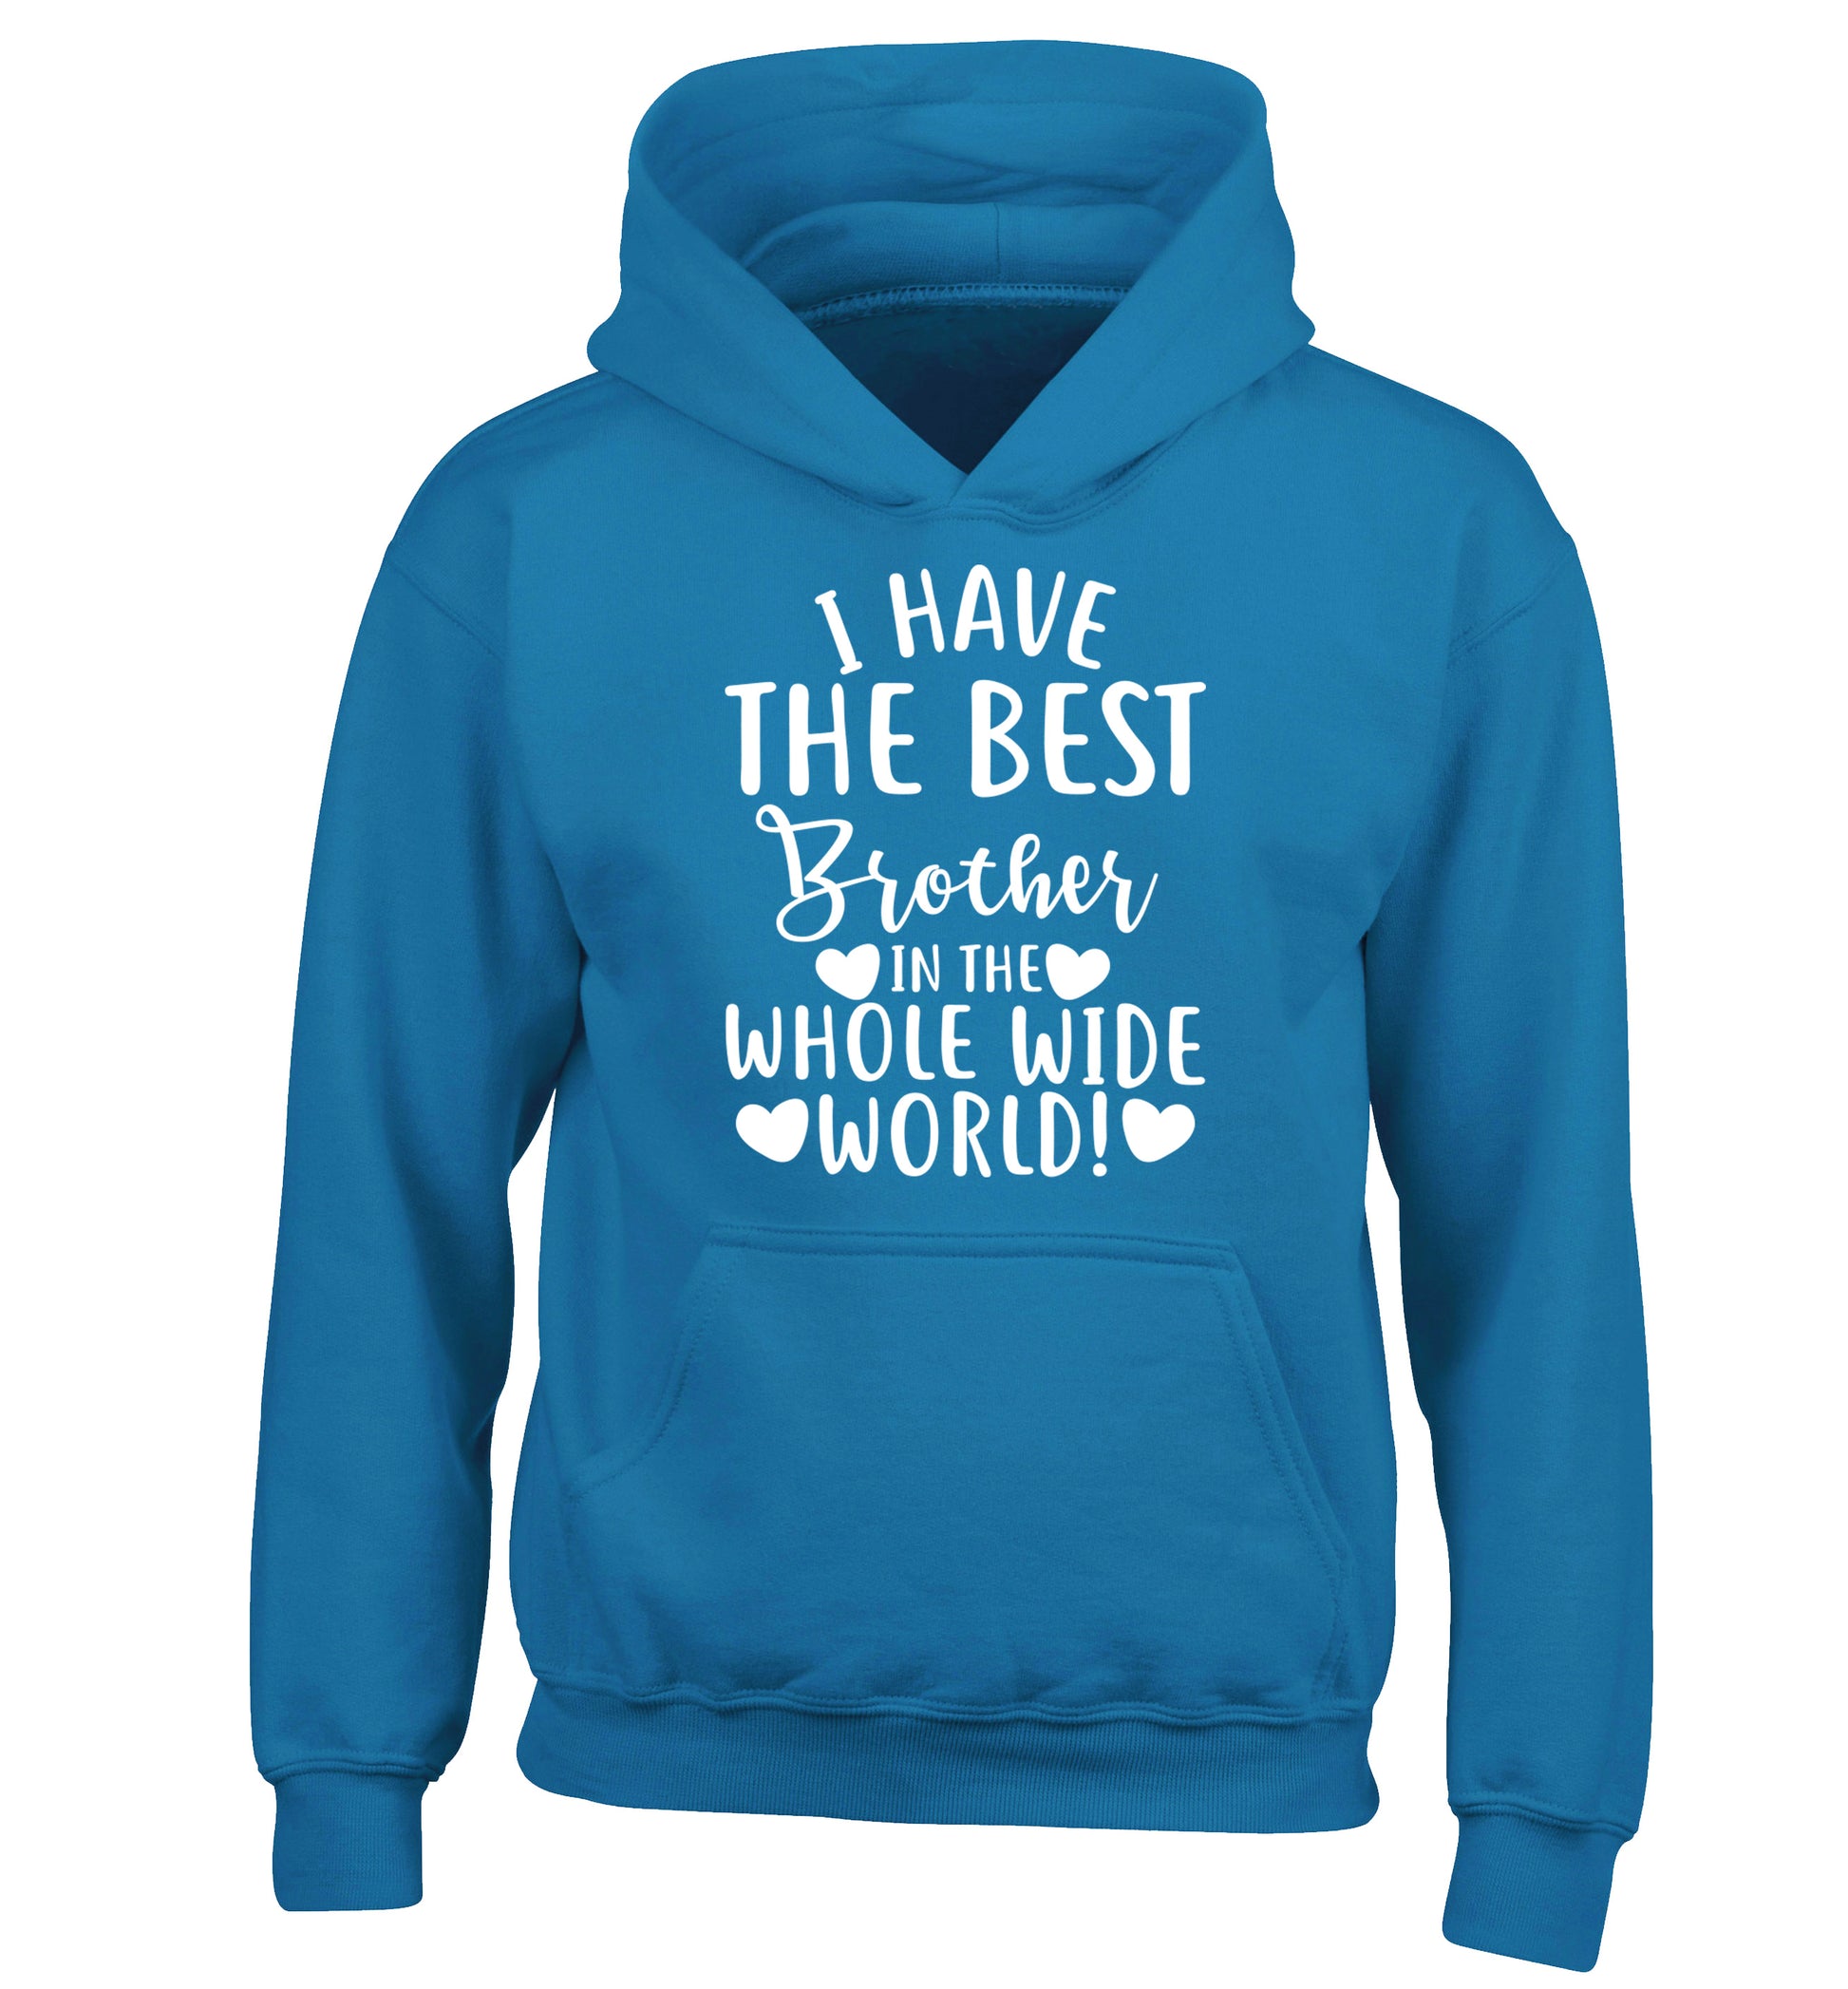 I have the best brother in the whole wide world! children's blue hoodie 12-13 Years